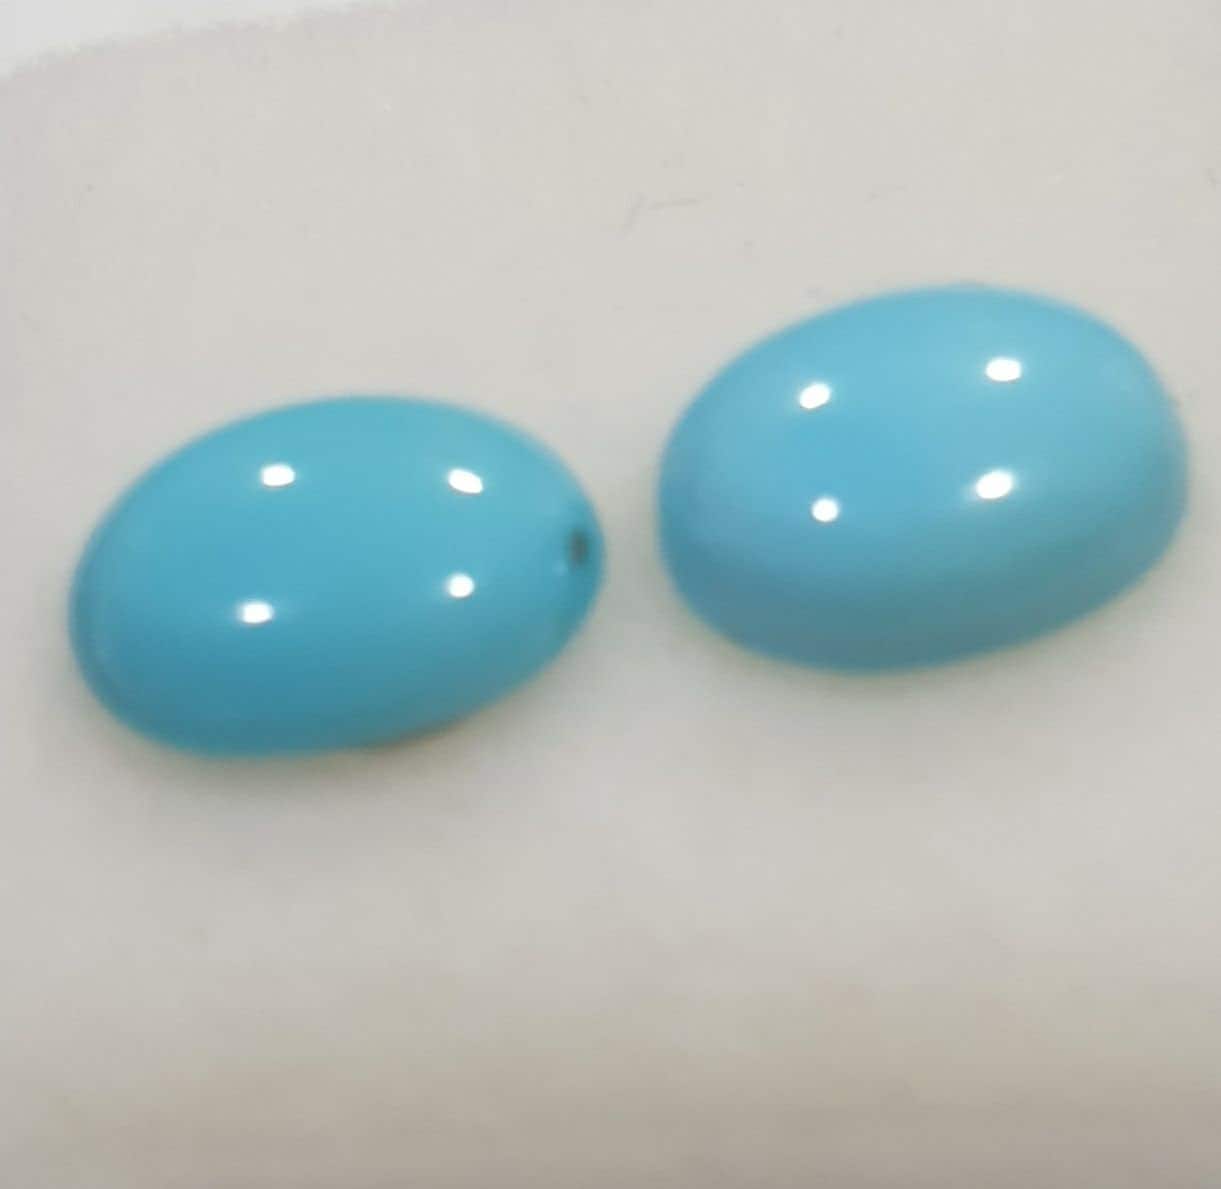 8x6mm Oval Faux Turquoise Stones, Turquoise Cabochons, Oval Cabochons, Jewelry  Making, Western Jewelry, Bezel Setting, Flat Back Stones 